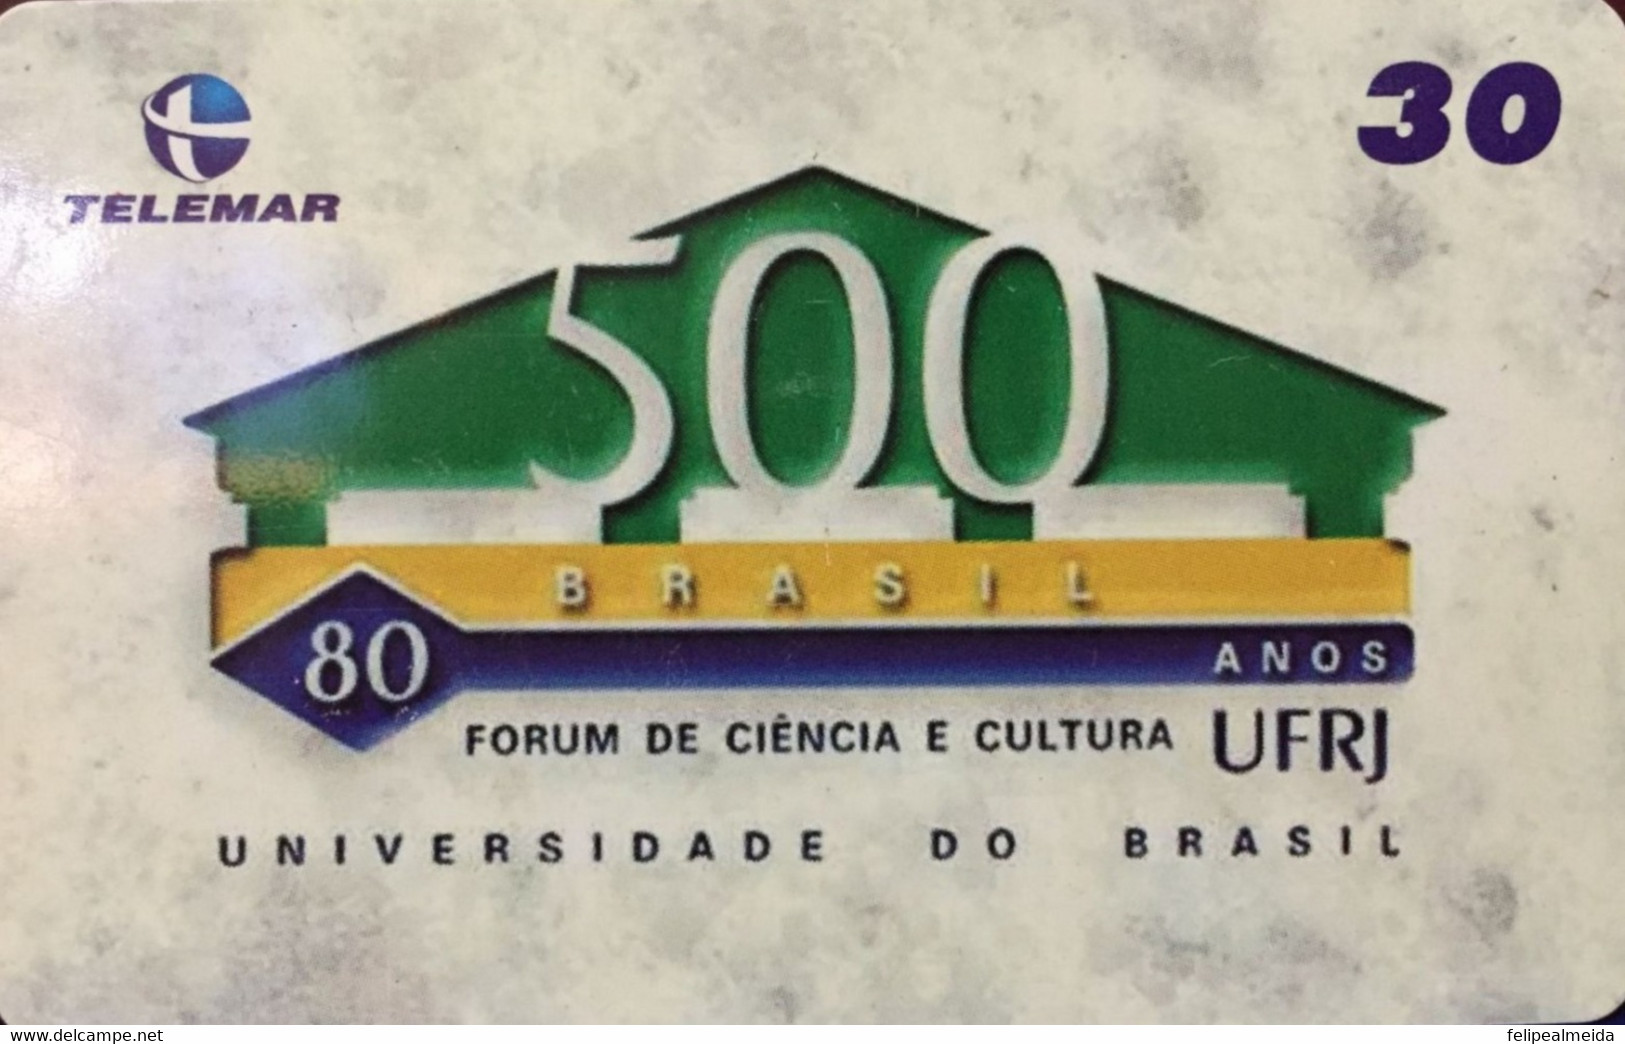 Phone Card Manufactured By Telemar In 2000 - 500 Years Of Brazil - Permanent Seminar - Science And Culture Forum - Feder - Cultural